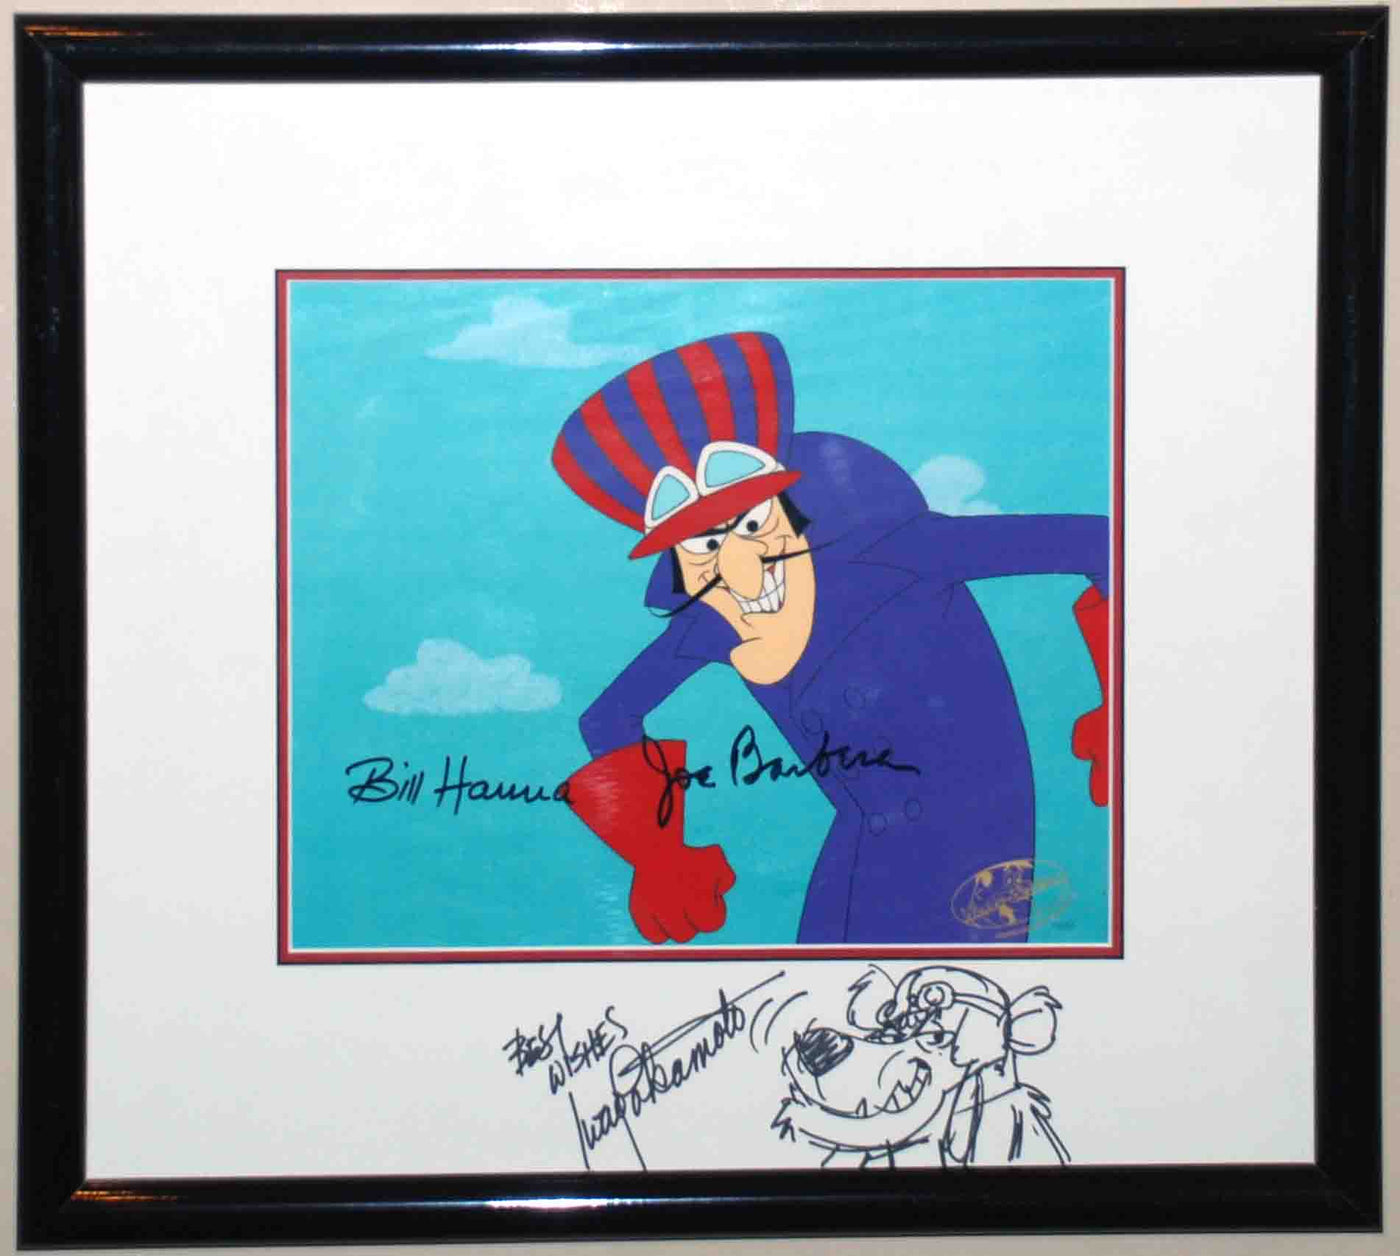 Hanna Barbera Production Cel from Fender Bender featuring Dick Dasterdly, Signed by Hanna, Barbera, Takamoto